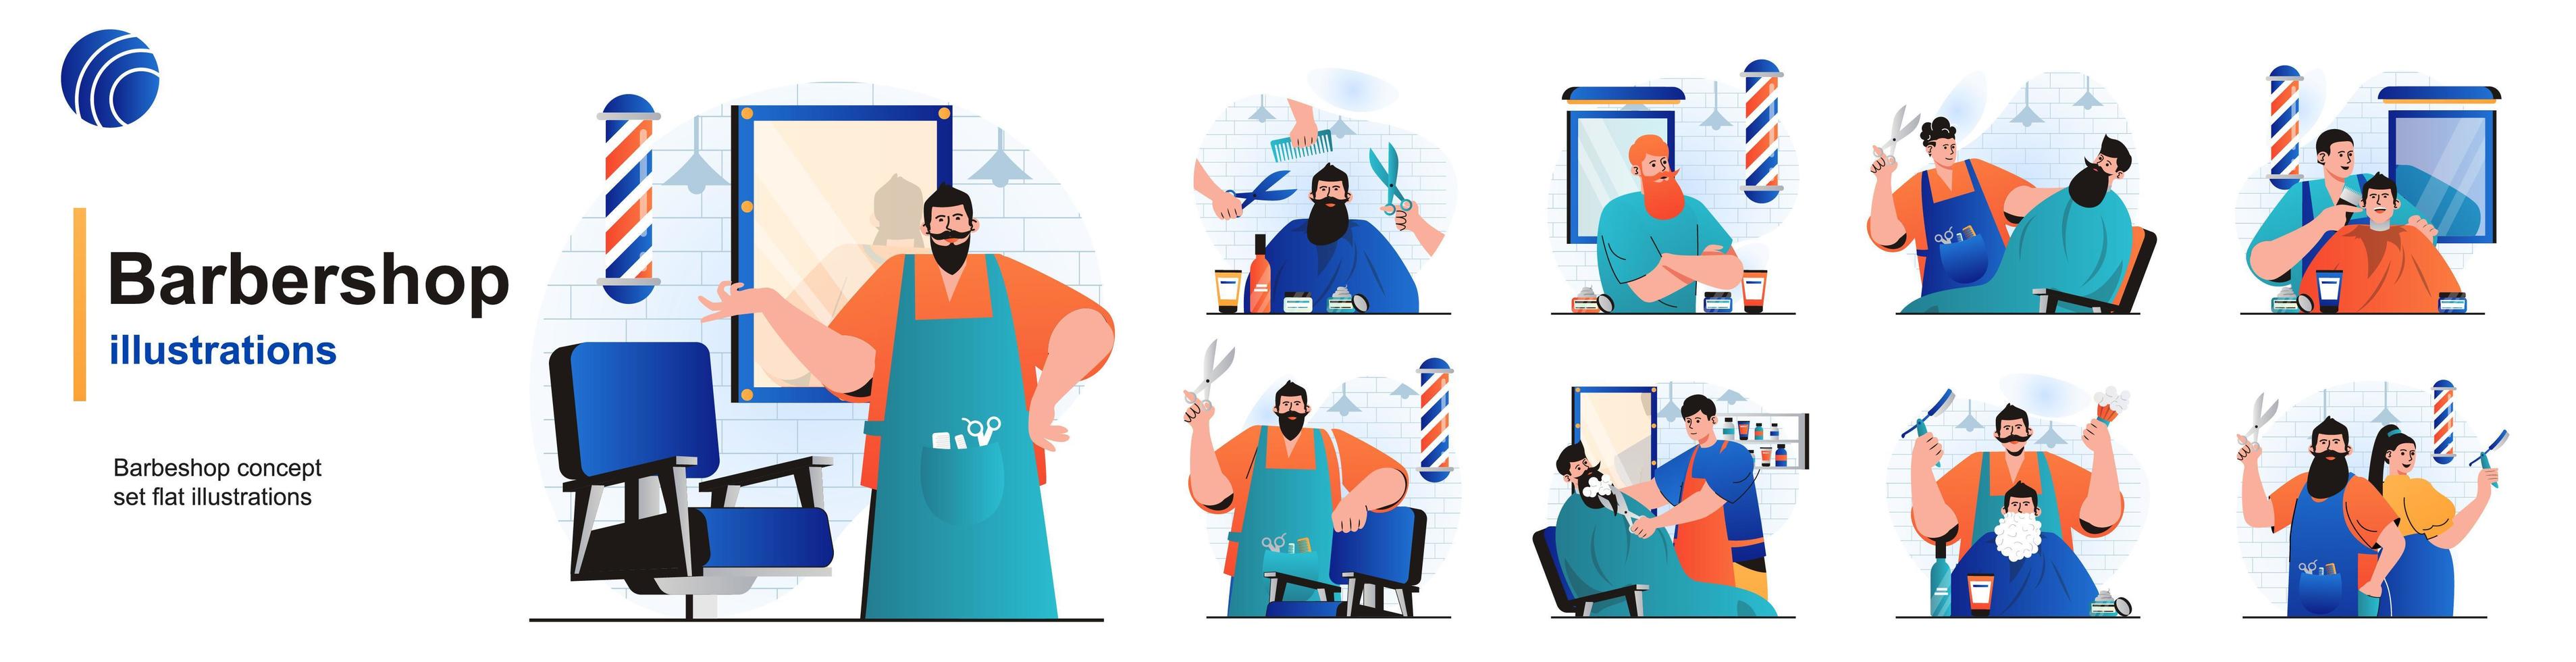 Barbershop isolated set. Hairdresser doing haircuts or shaving beard in salon. People collection of scenes in flat design. Vector illustration for blogging, website, mobile app, promotional materials.